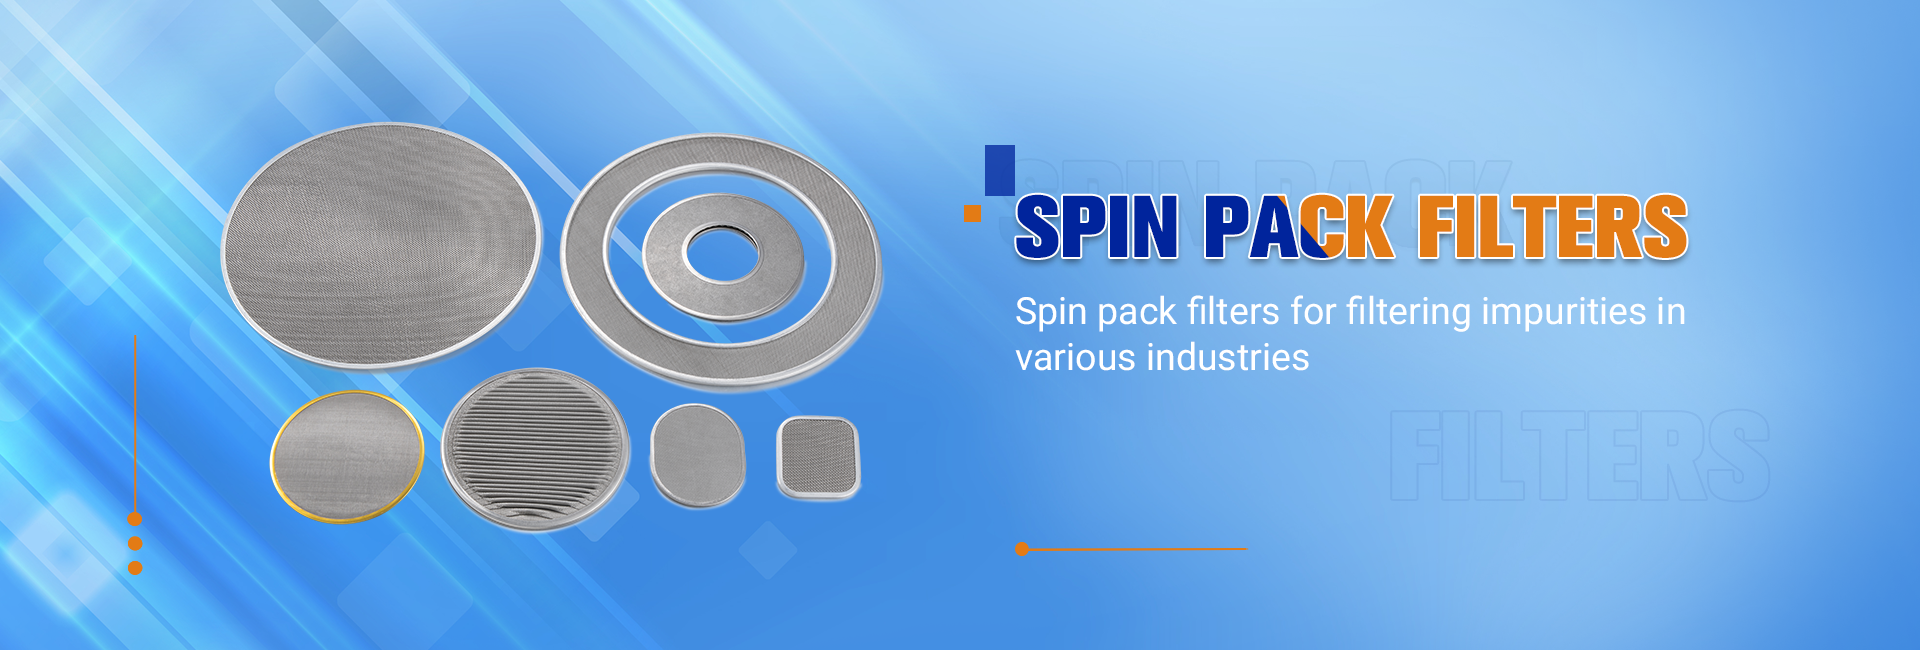 SPIN PACK FLTER FOR SYNTHETIC FIBER SPINNING